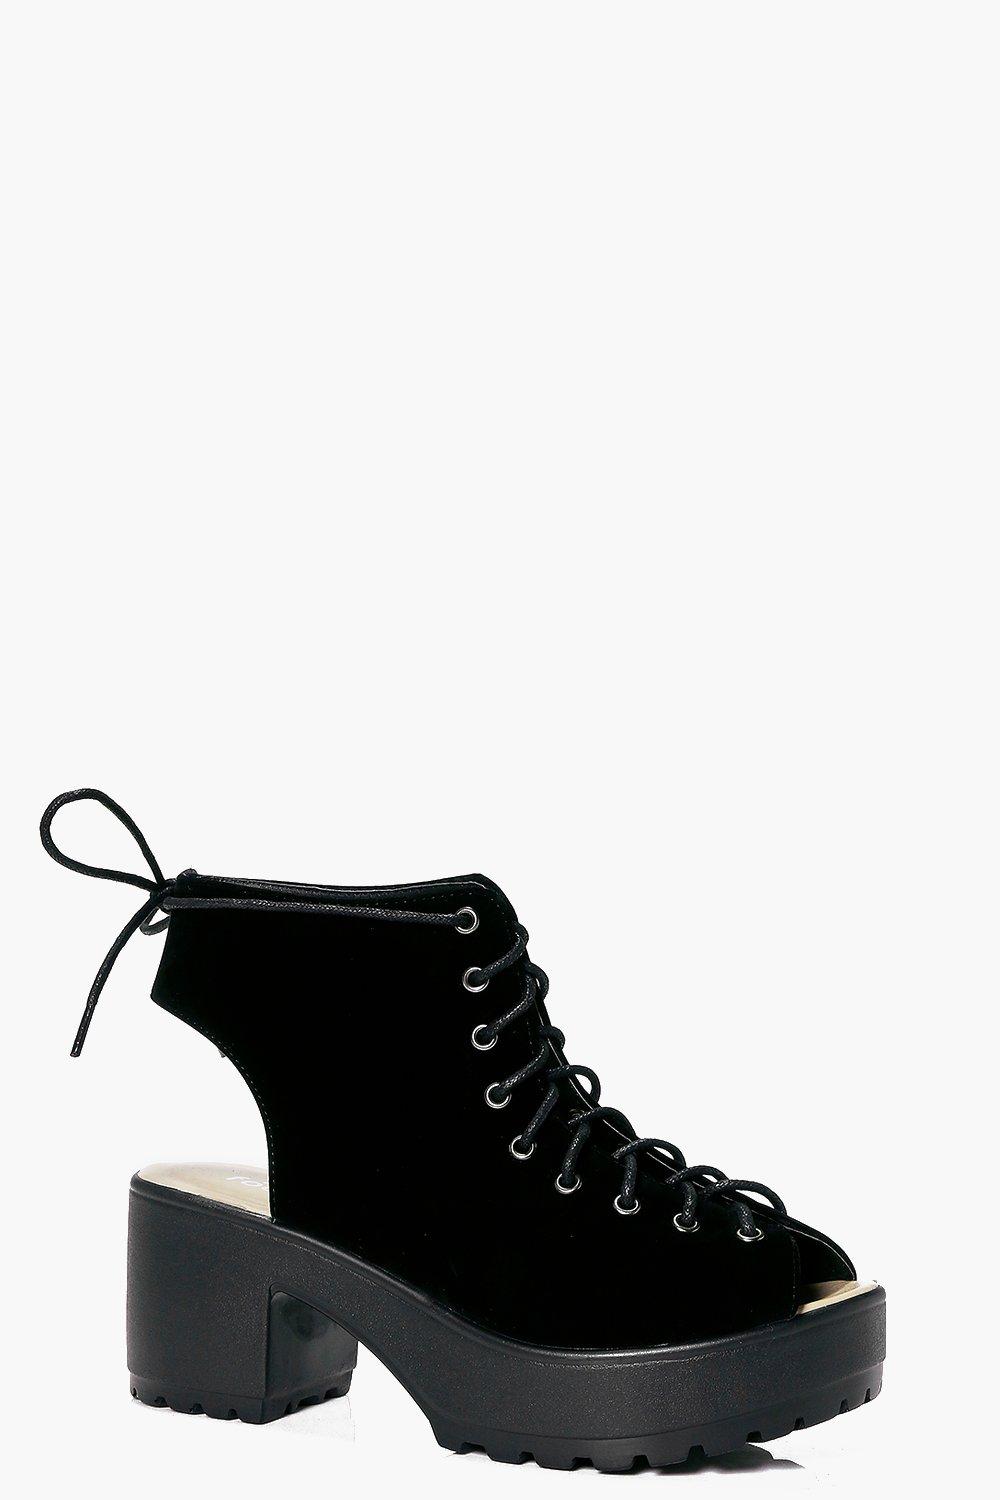 Violet Peeptoe Lace Up Cleated Shoe Boot at boohoo.com